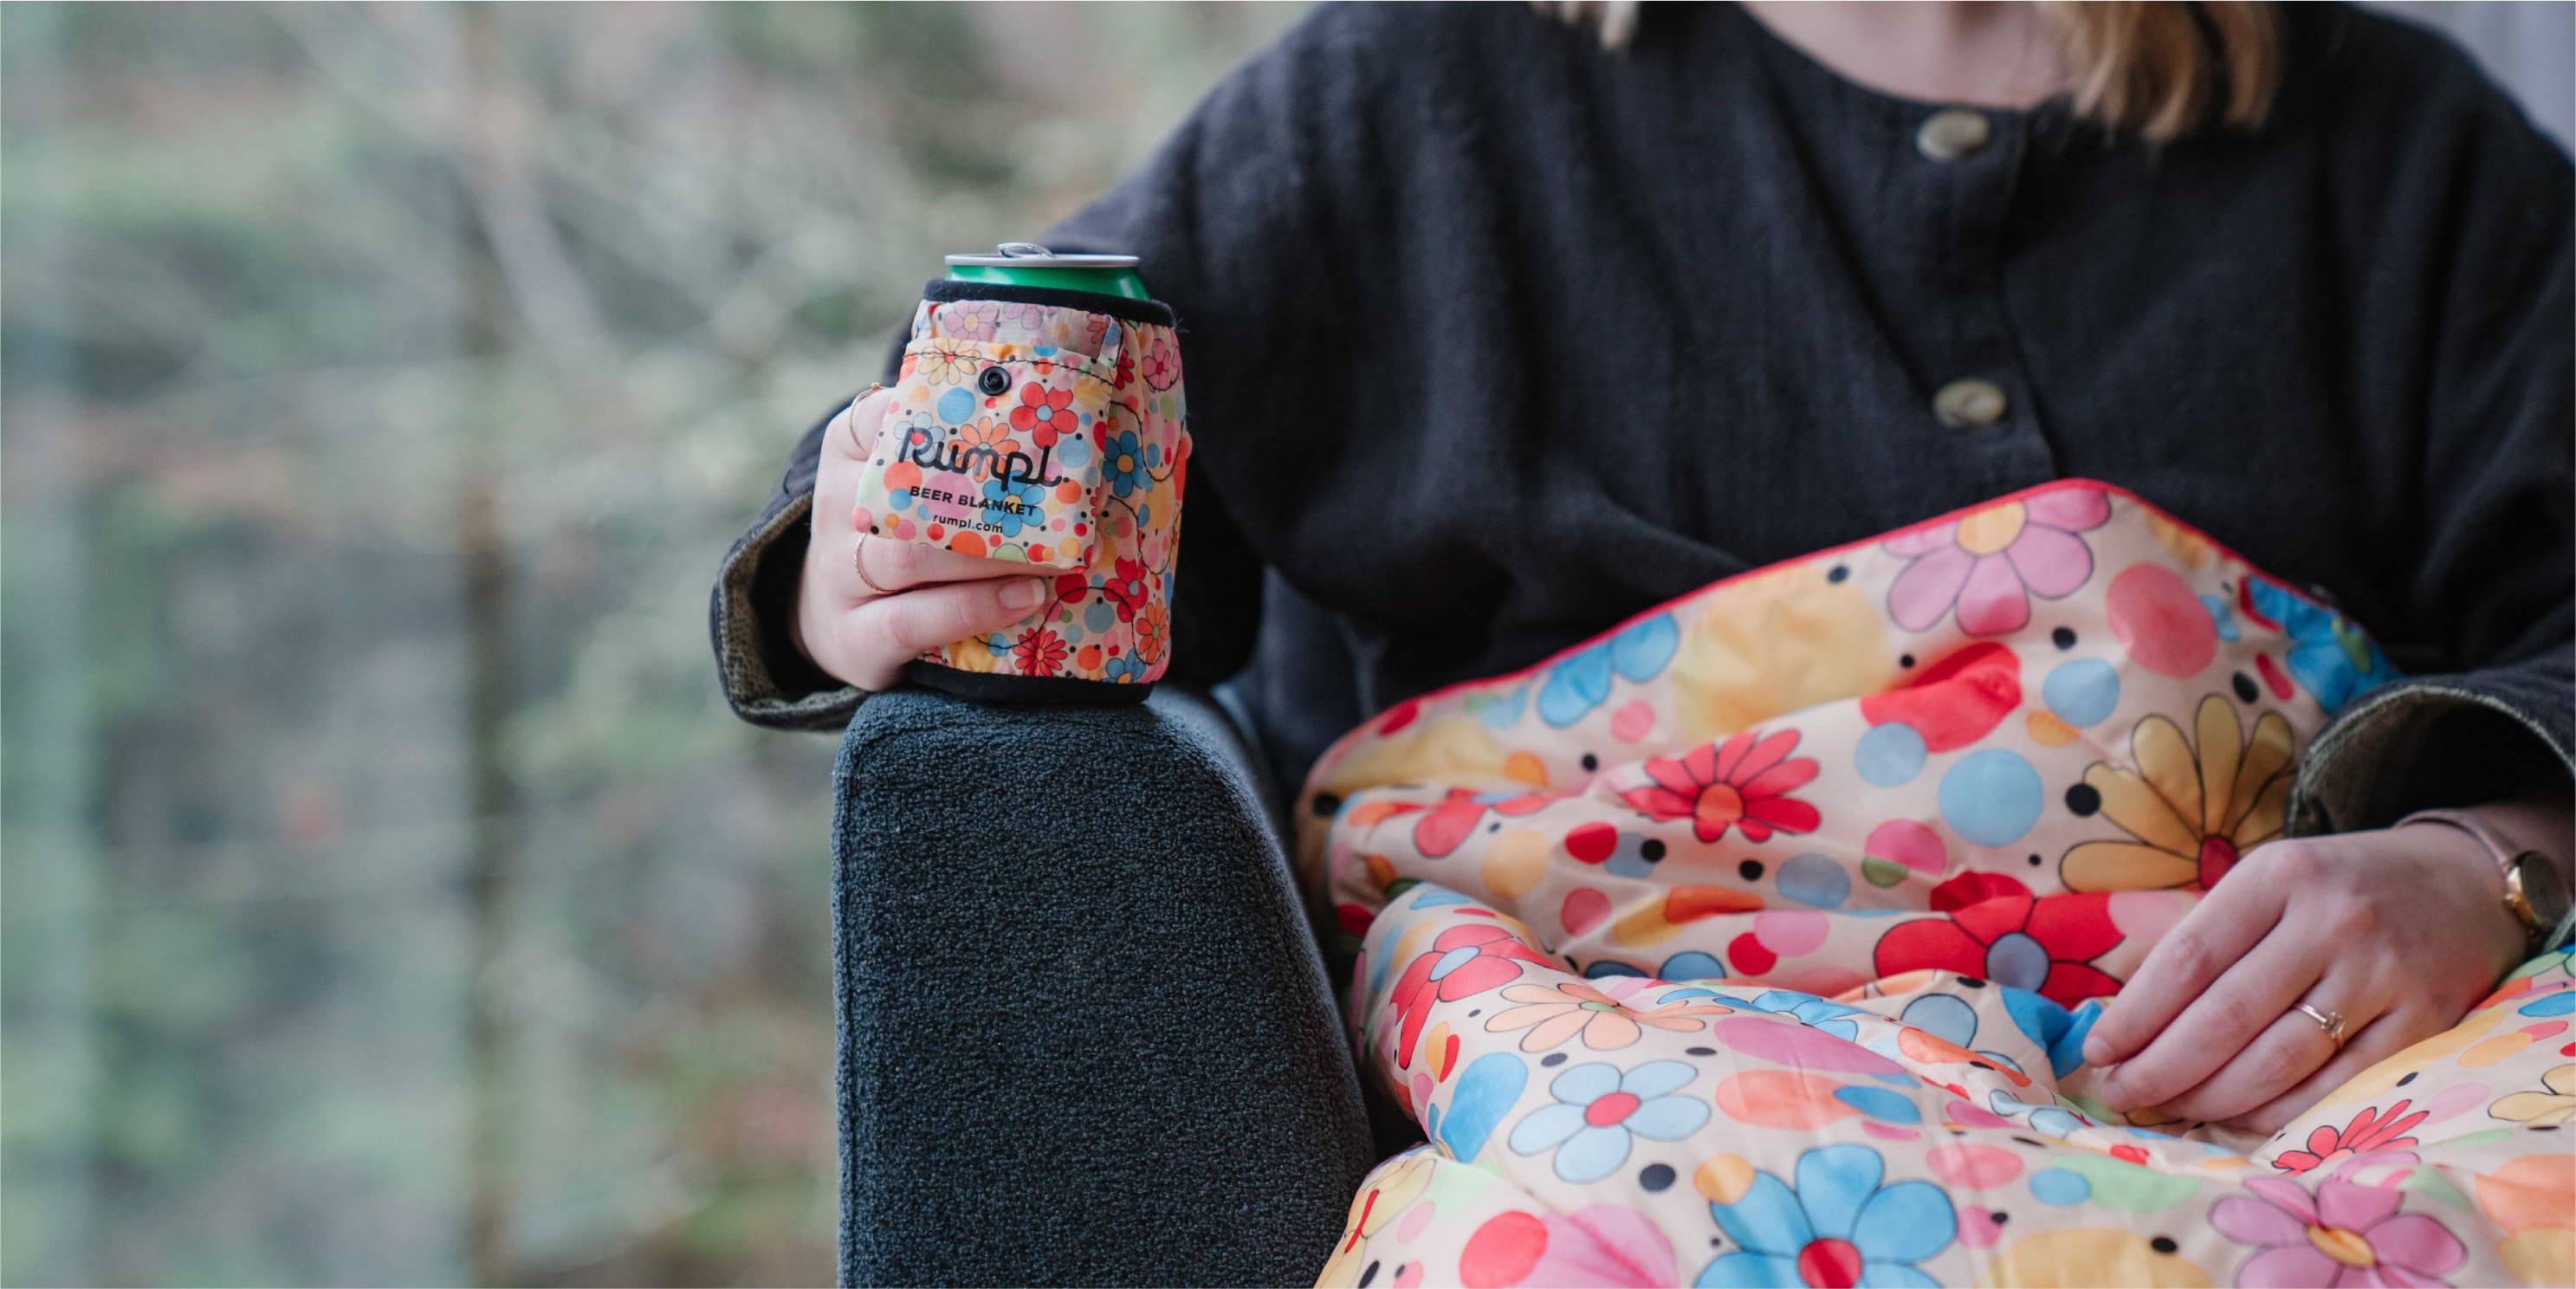 Woman sitting on a couch with a flower beer blanket and flower rumpl blanket